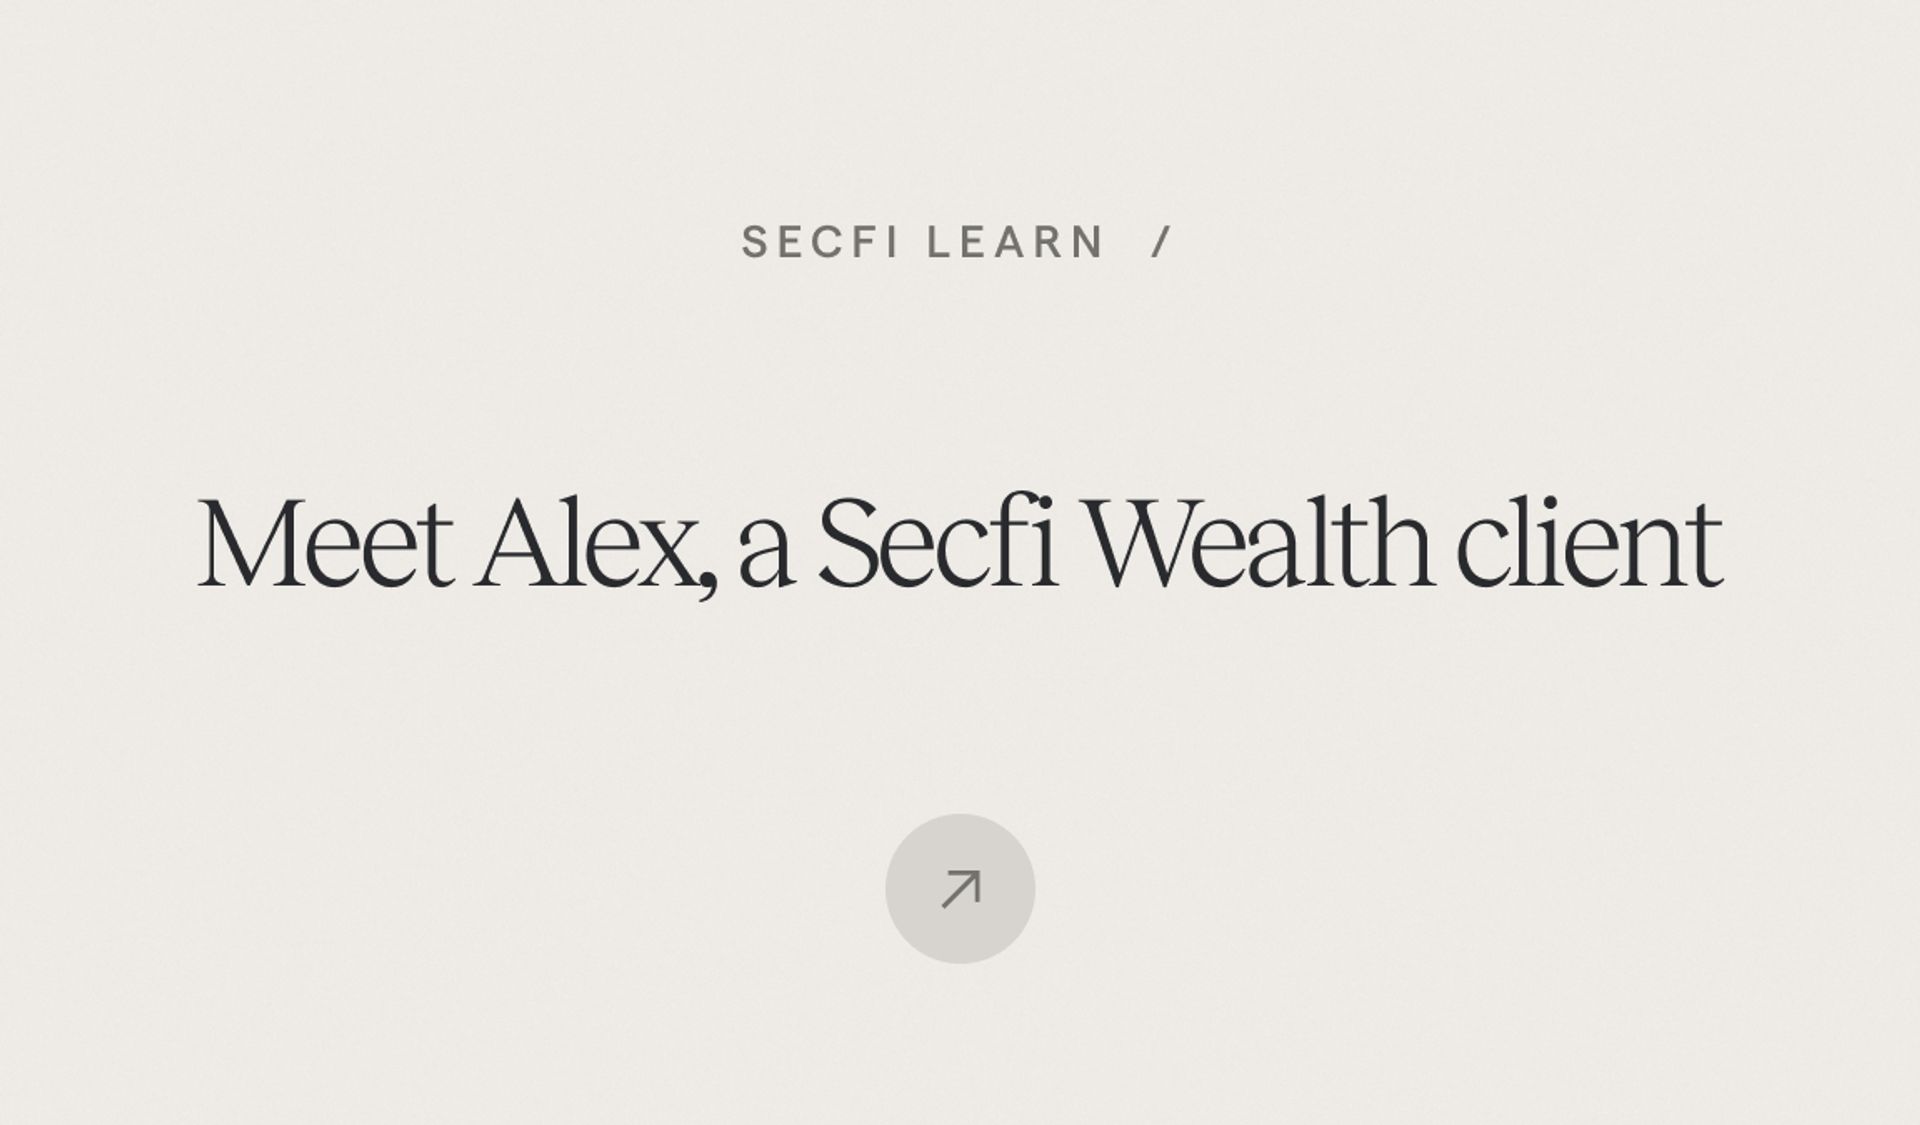 Alex a Secfi Wealth client talks about why she wanted financial advice before her startup goes public